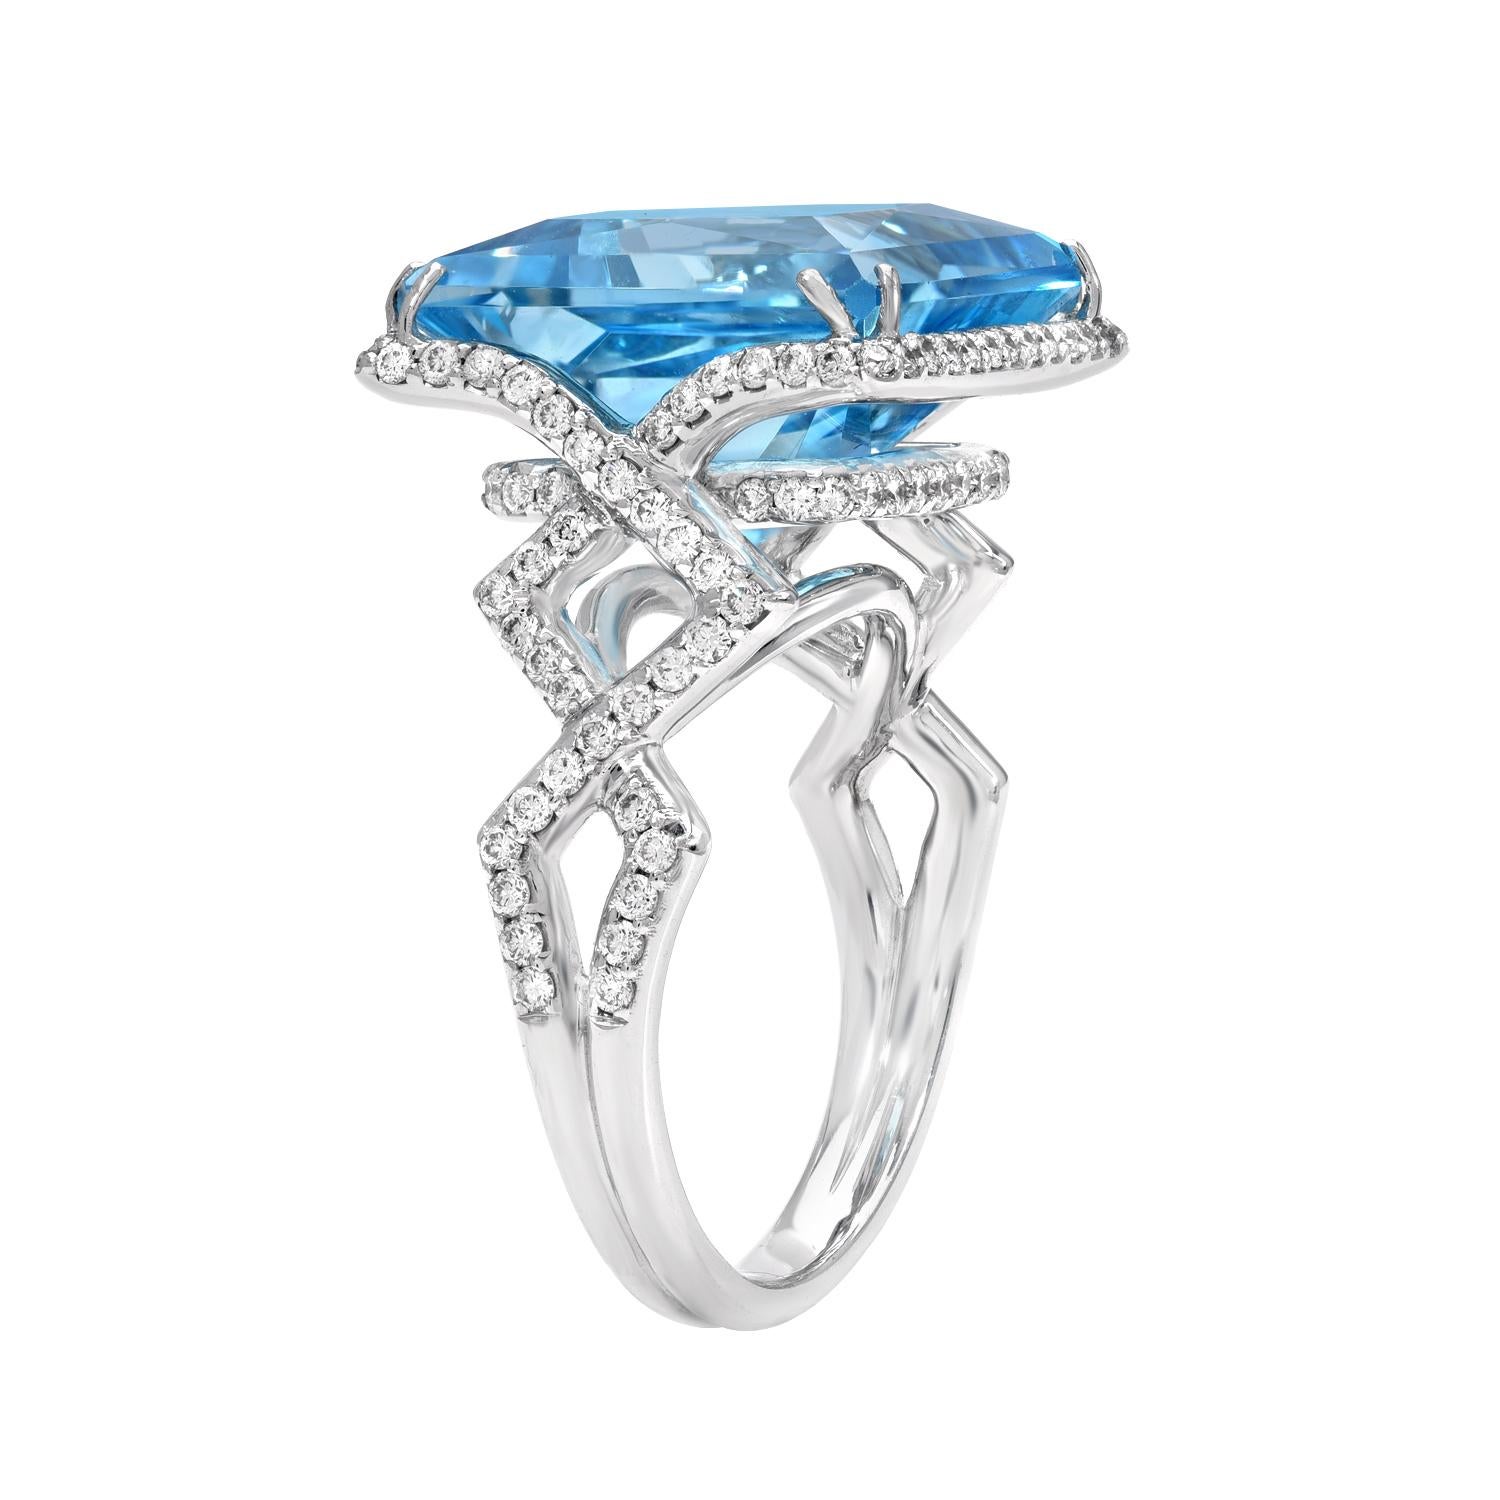 White gold diamond ring featuring a vibrant 14.66 carat princess cut Blue Topaz, adorned by a total of 0.97 carat round brilliant diamonds.
Crafted in 18K white gold.
Size 7. Re-sizing is complementary upon request  
Returns are accepted and paid by